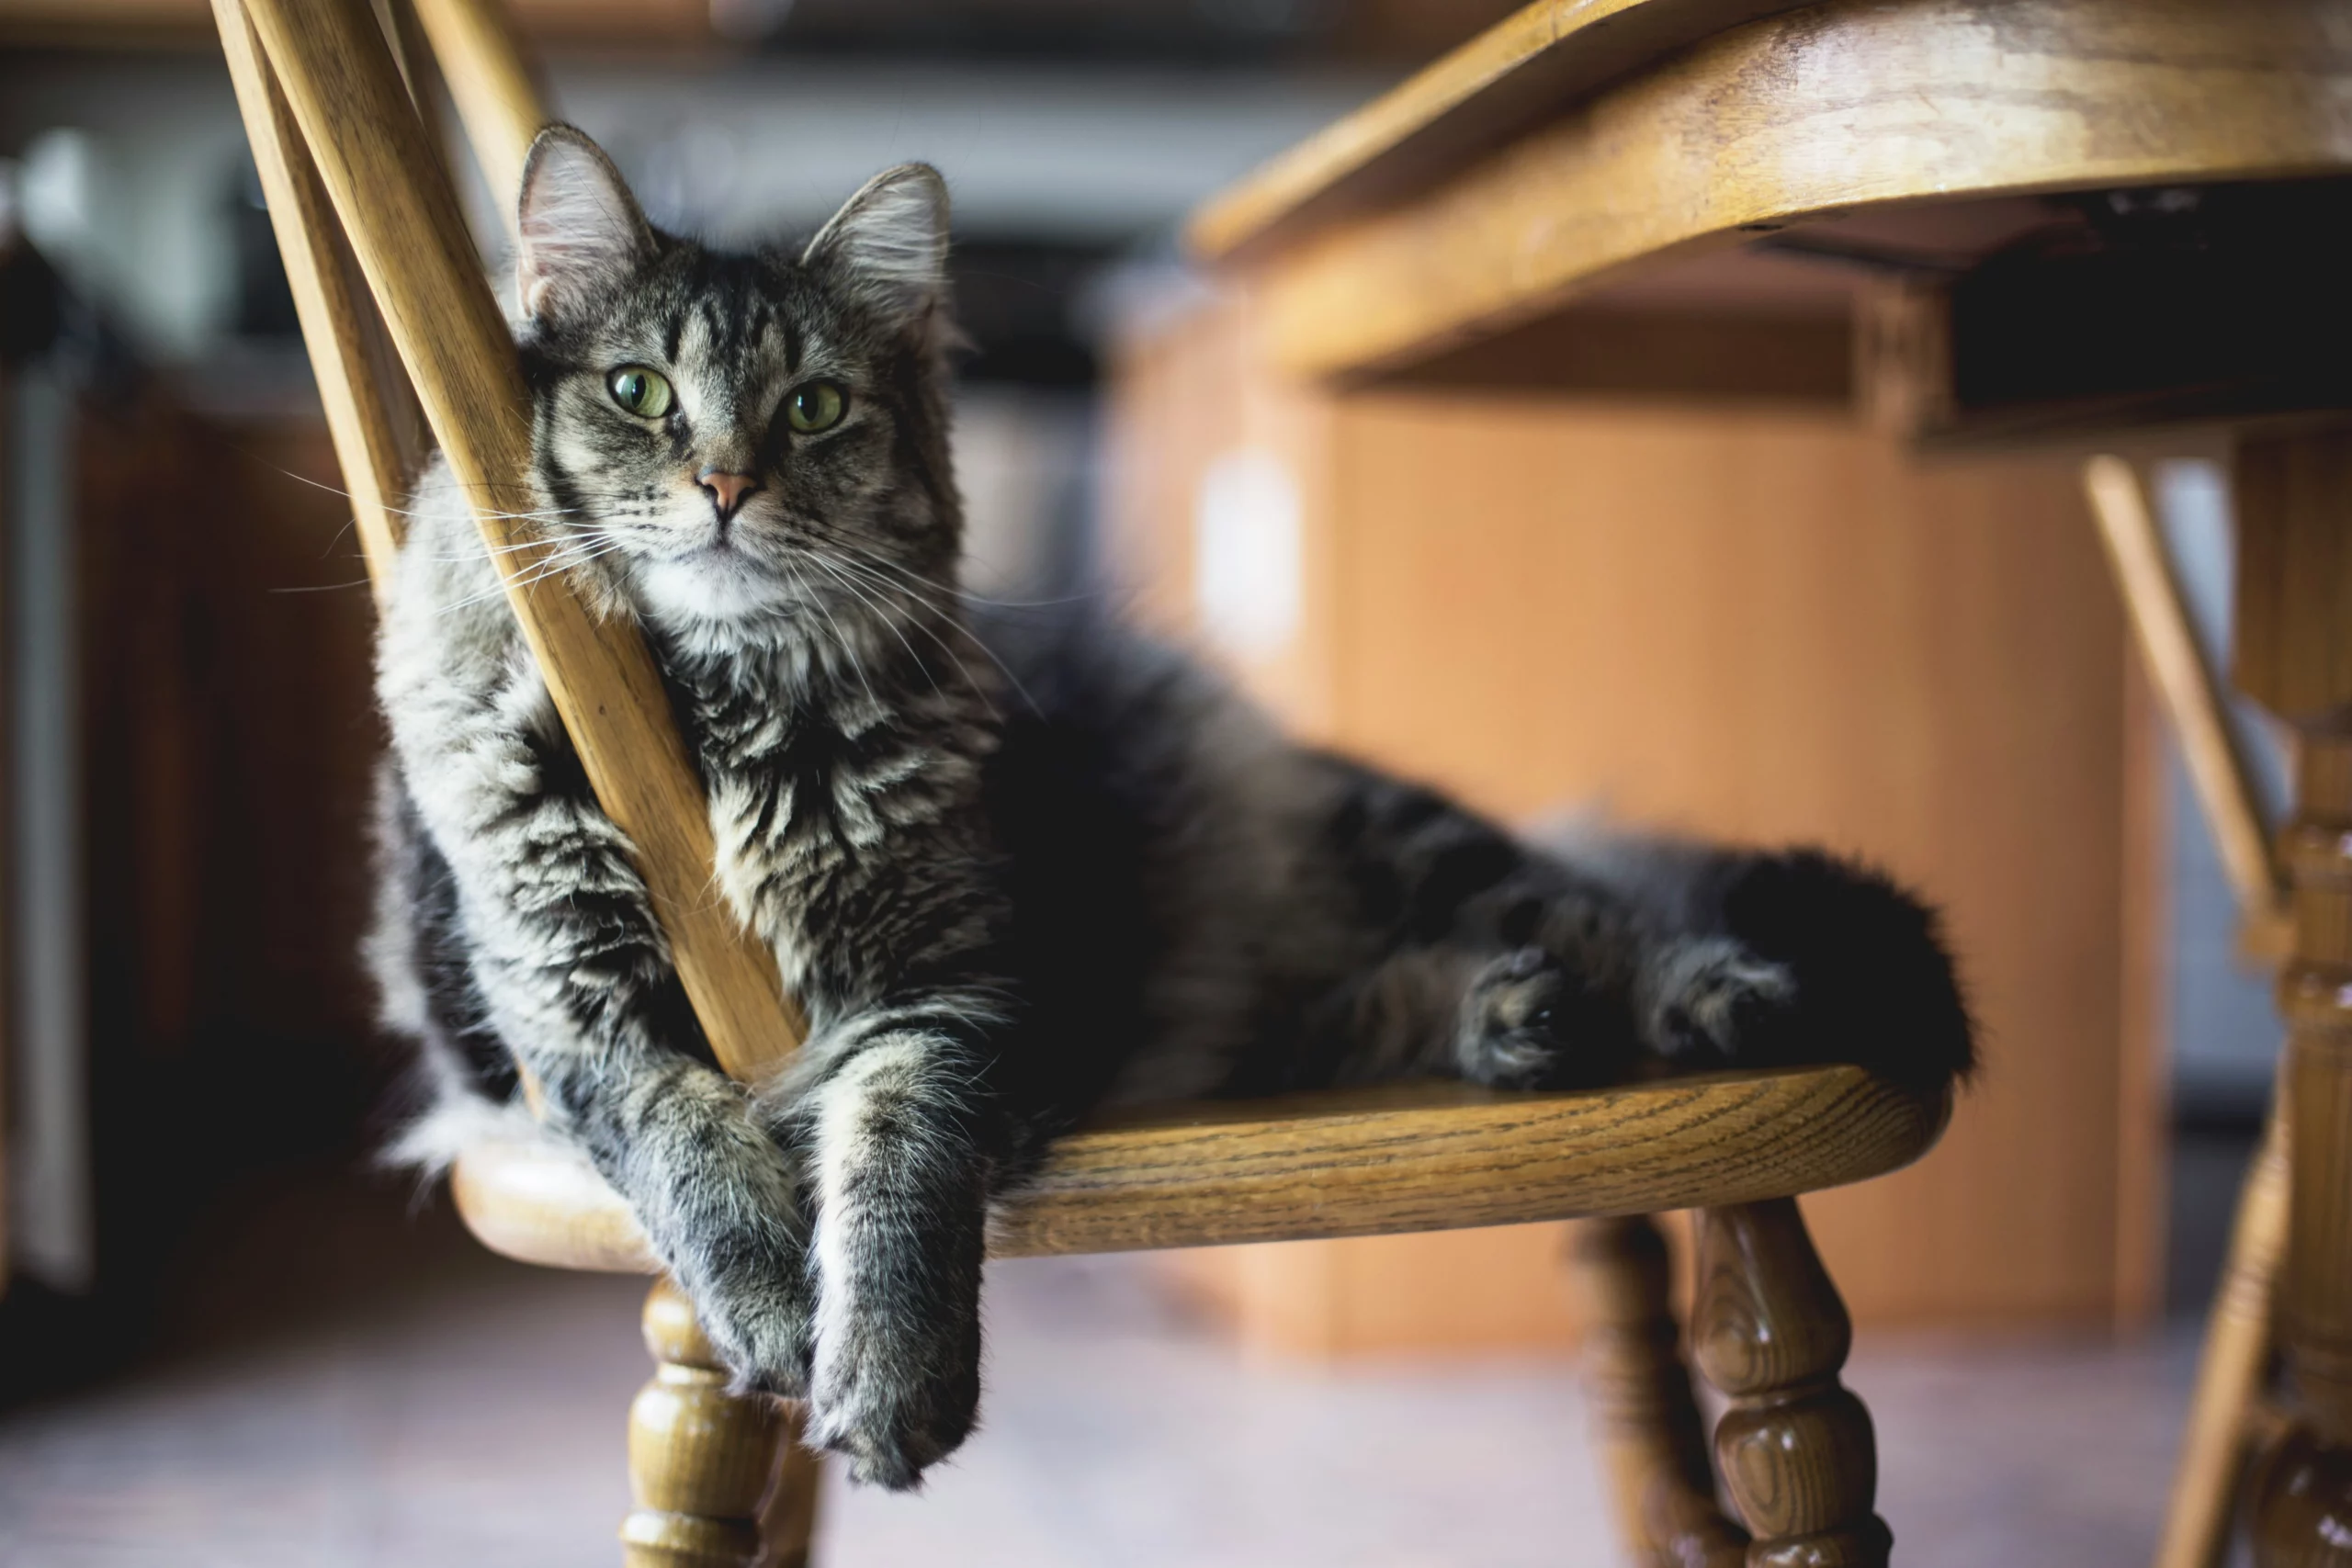 A cat is rubbing its face up against the back of a chair as it sits on the bottom of it. Green cleaner protects pets from touching freshly cleaned surfaces.